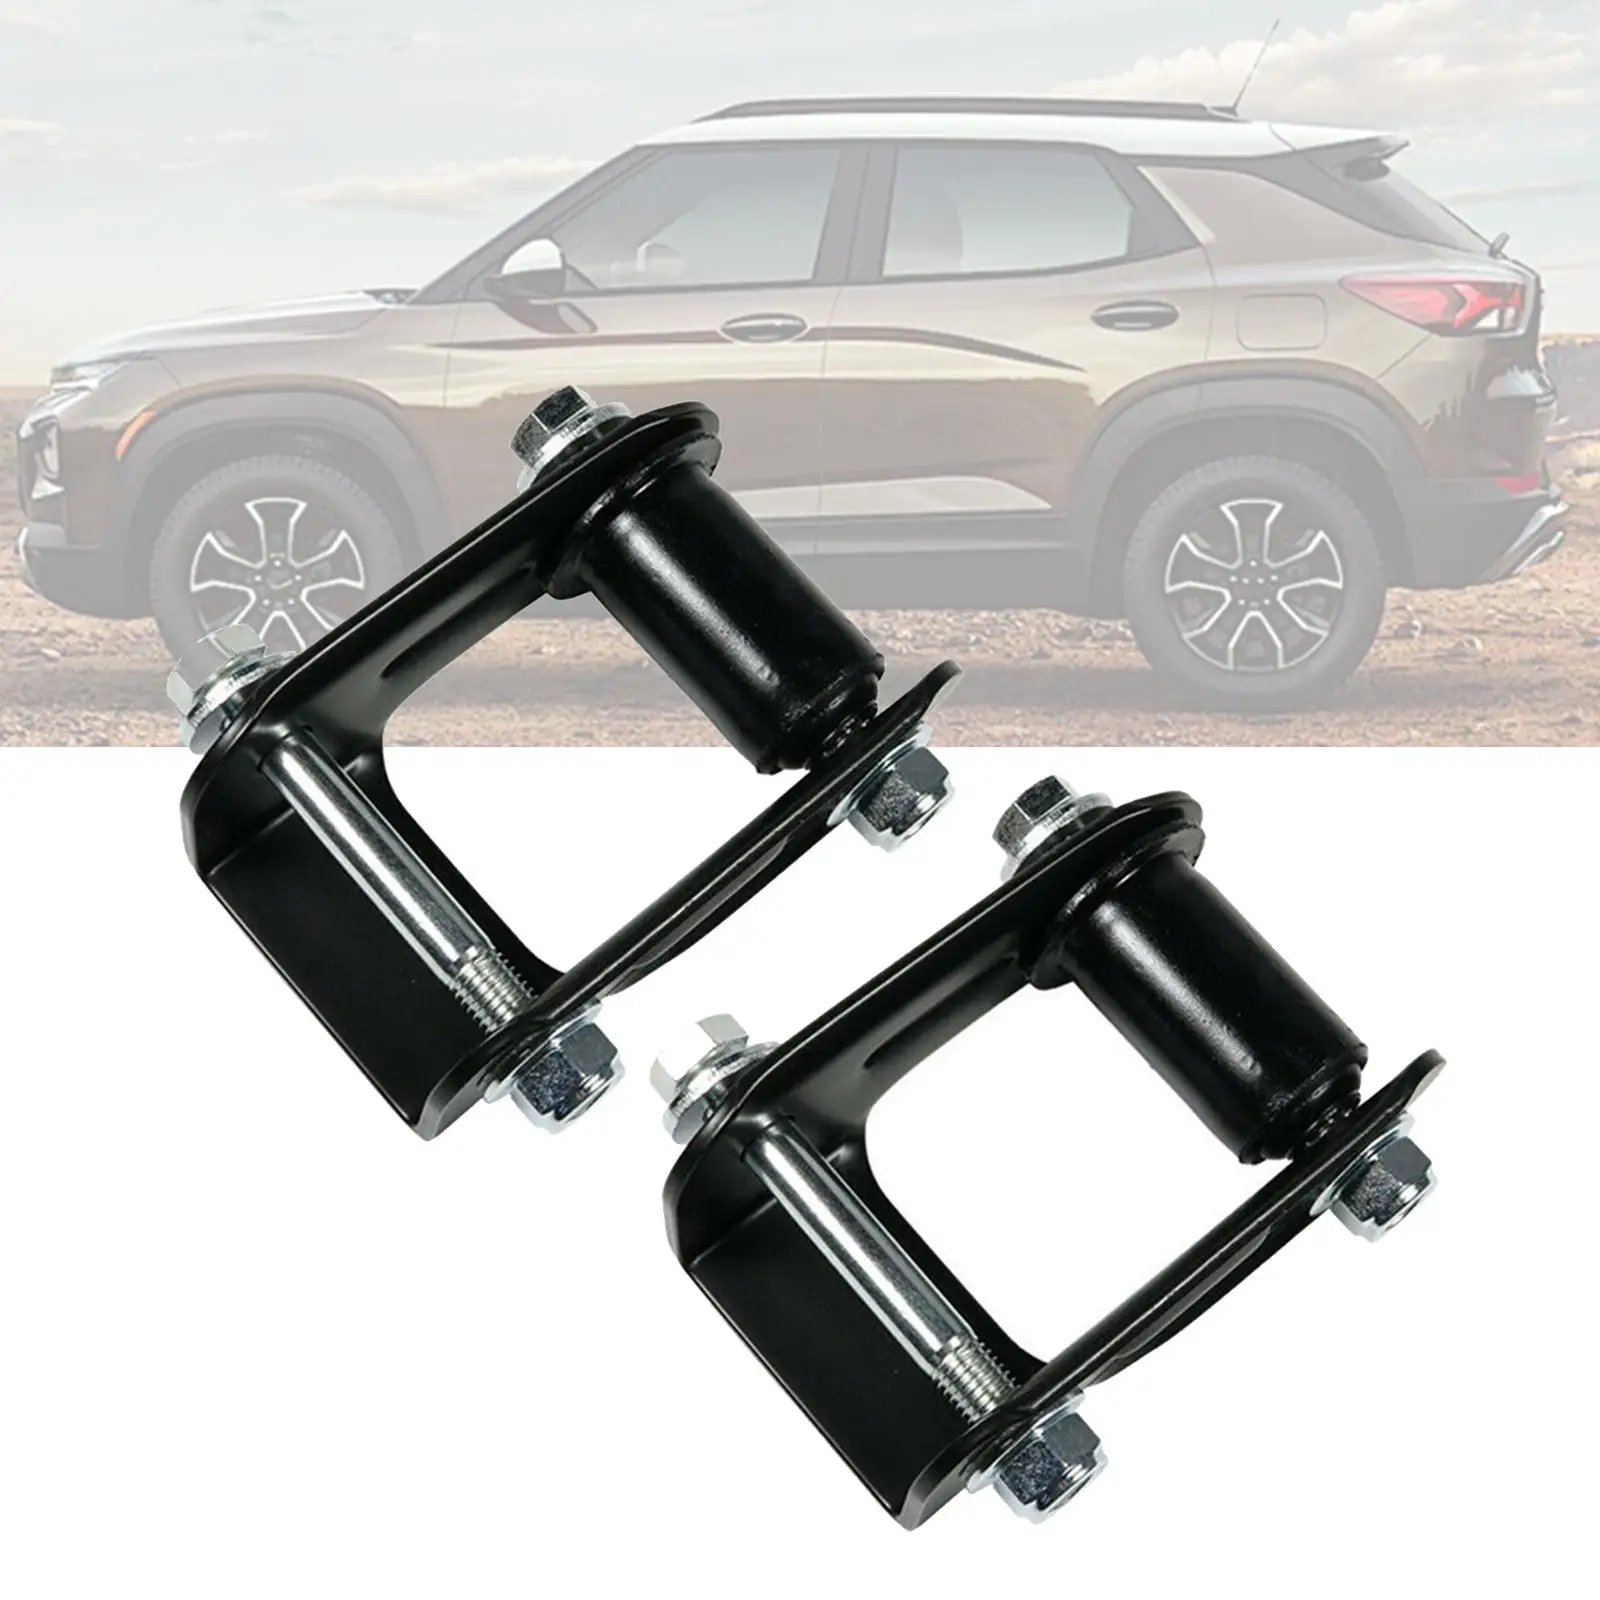 2x Rear Leaf Spring Shackle Kit Glossy Appearance Professional Fine Surface Processing Easy to Mount Replaces for Chevrolet